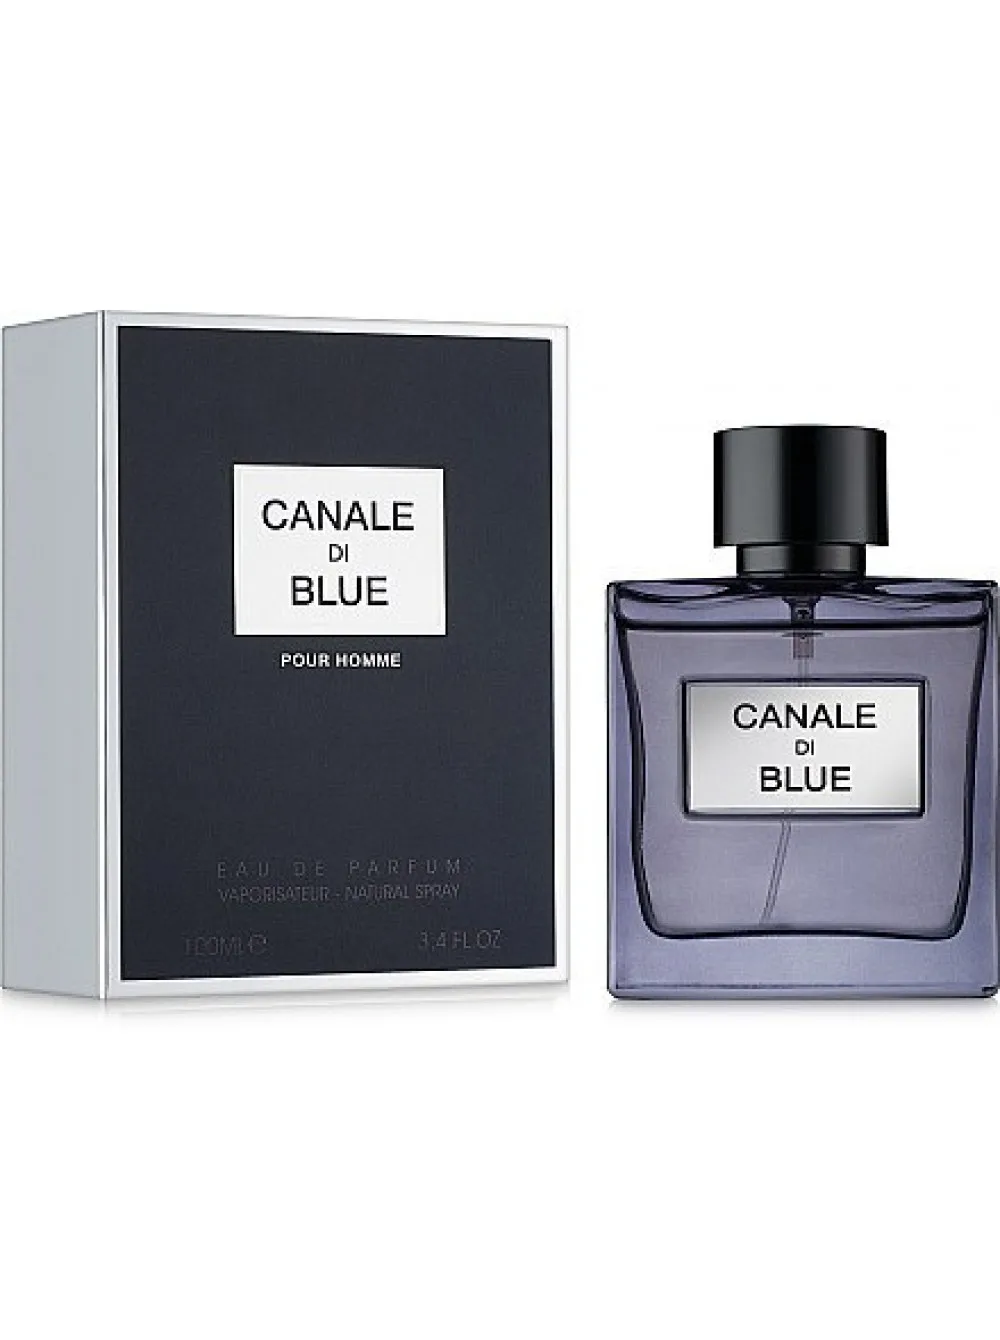 Fragrance world Canale di blue men's perfume water 100 ml